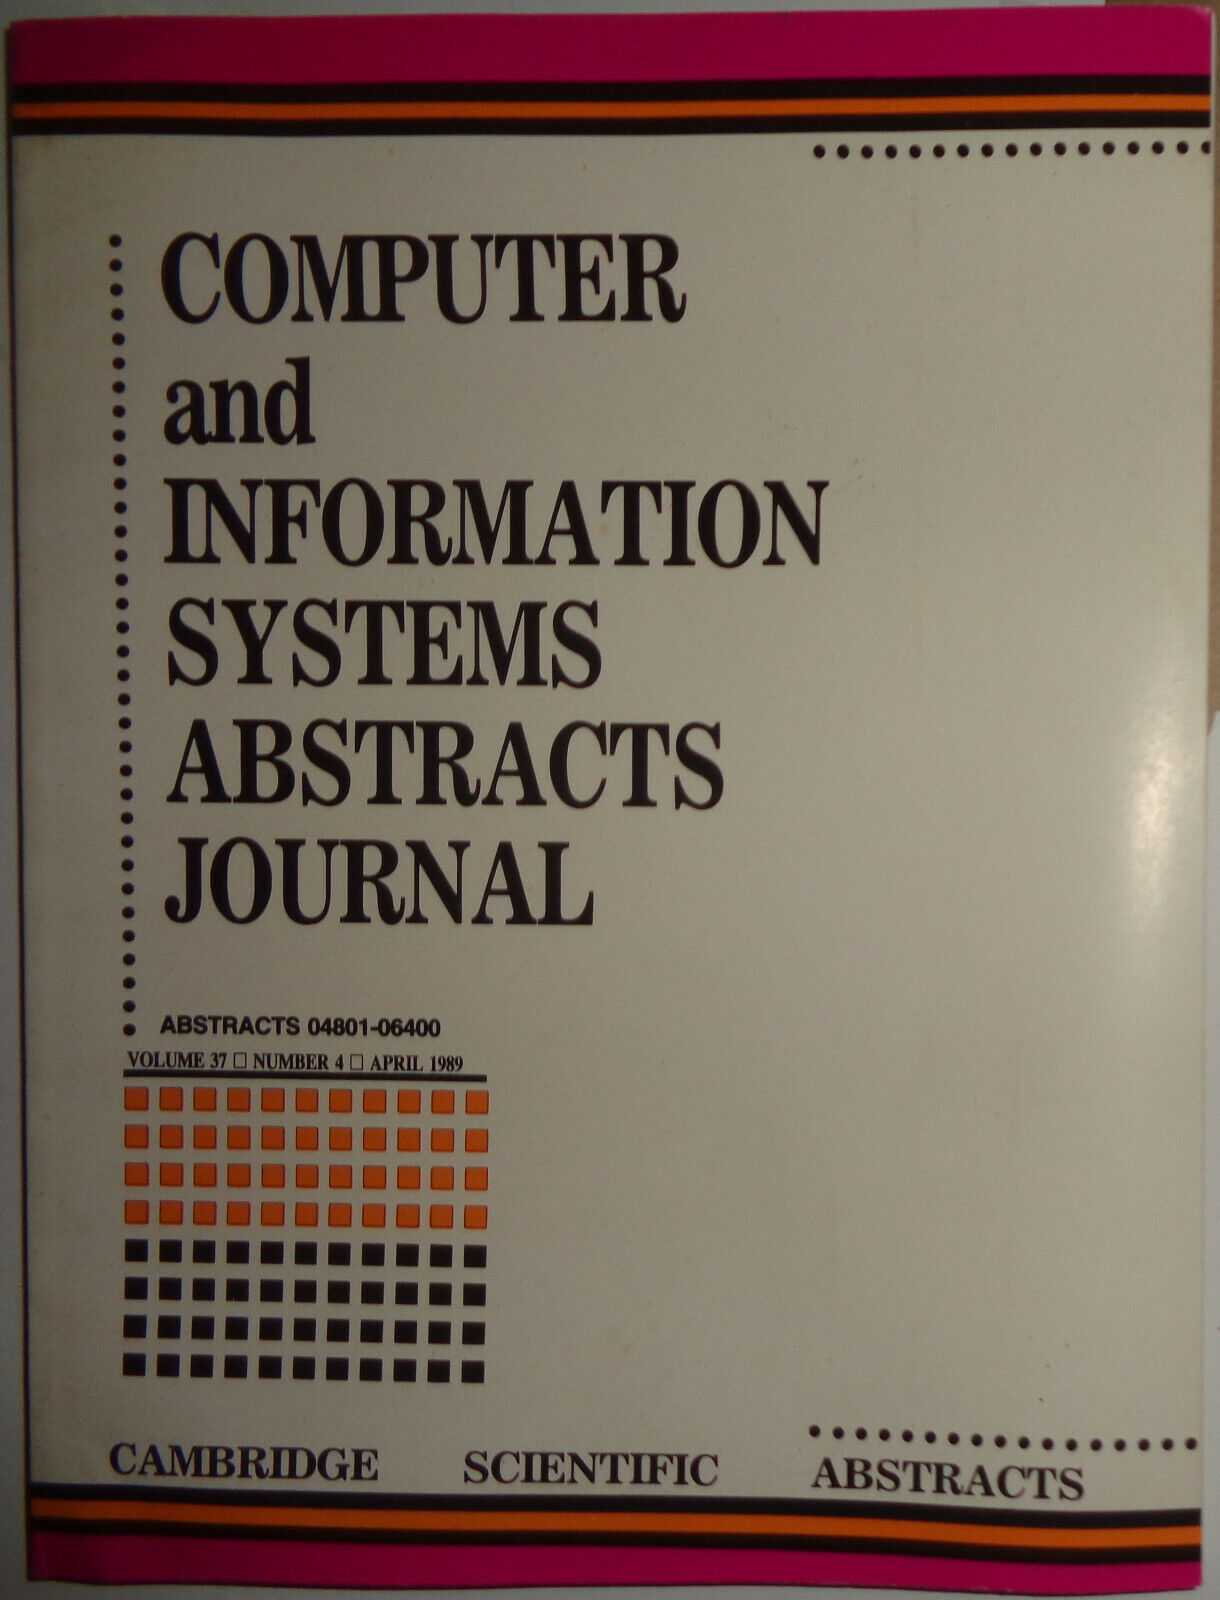 Computer and Information Systems Abstracts Journal, April 1989  - [04801-06400] 